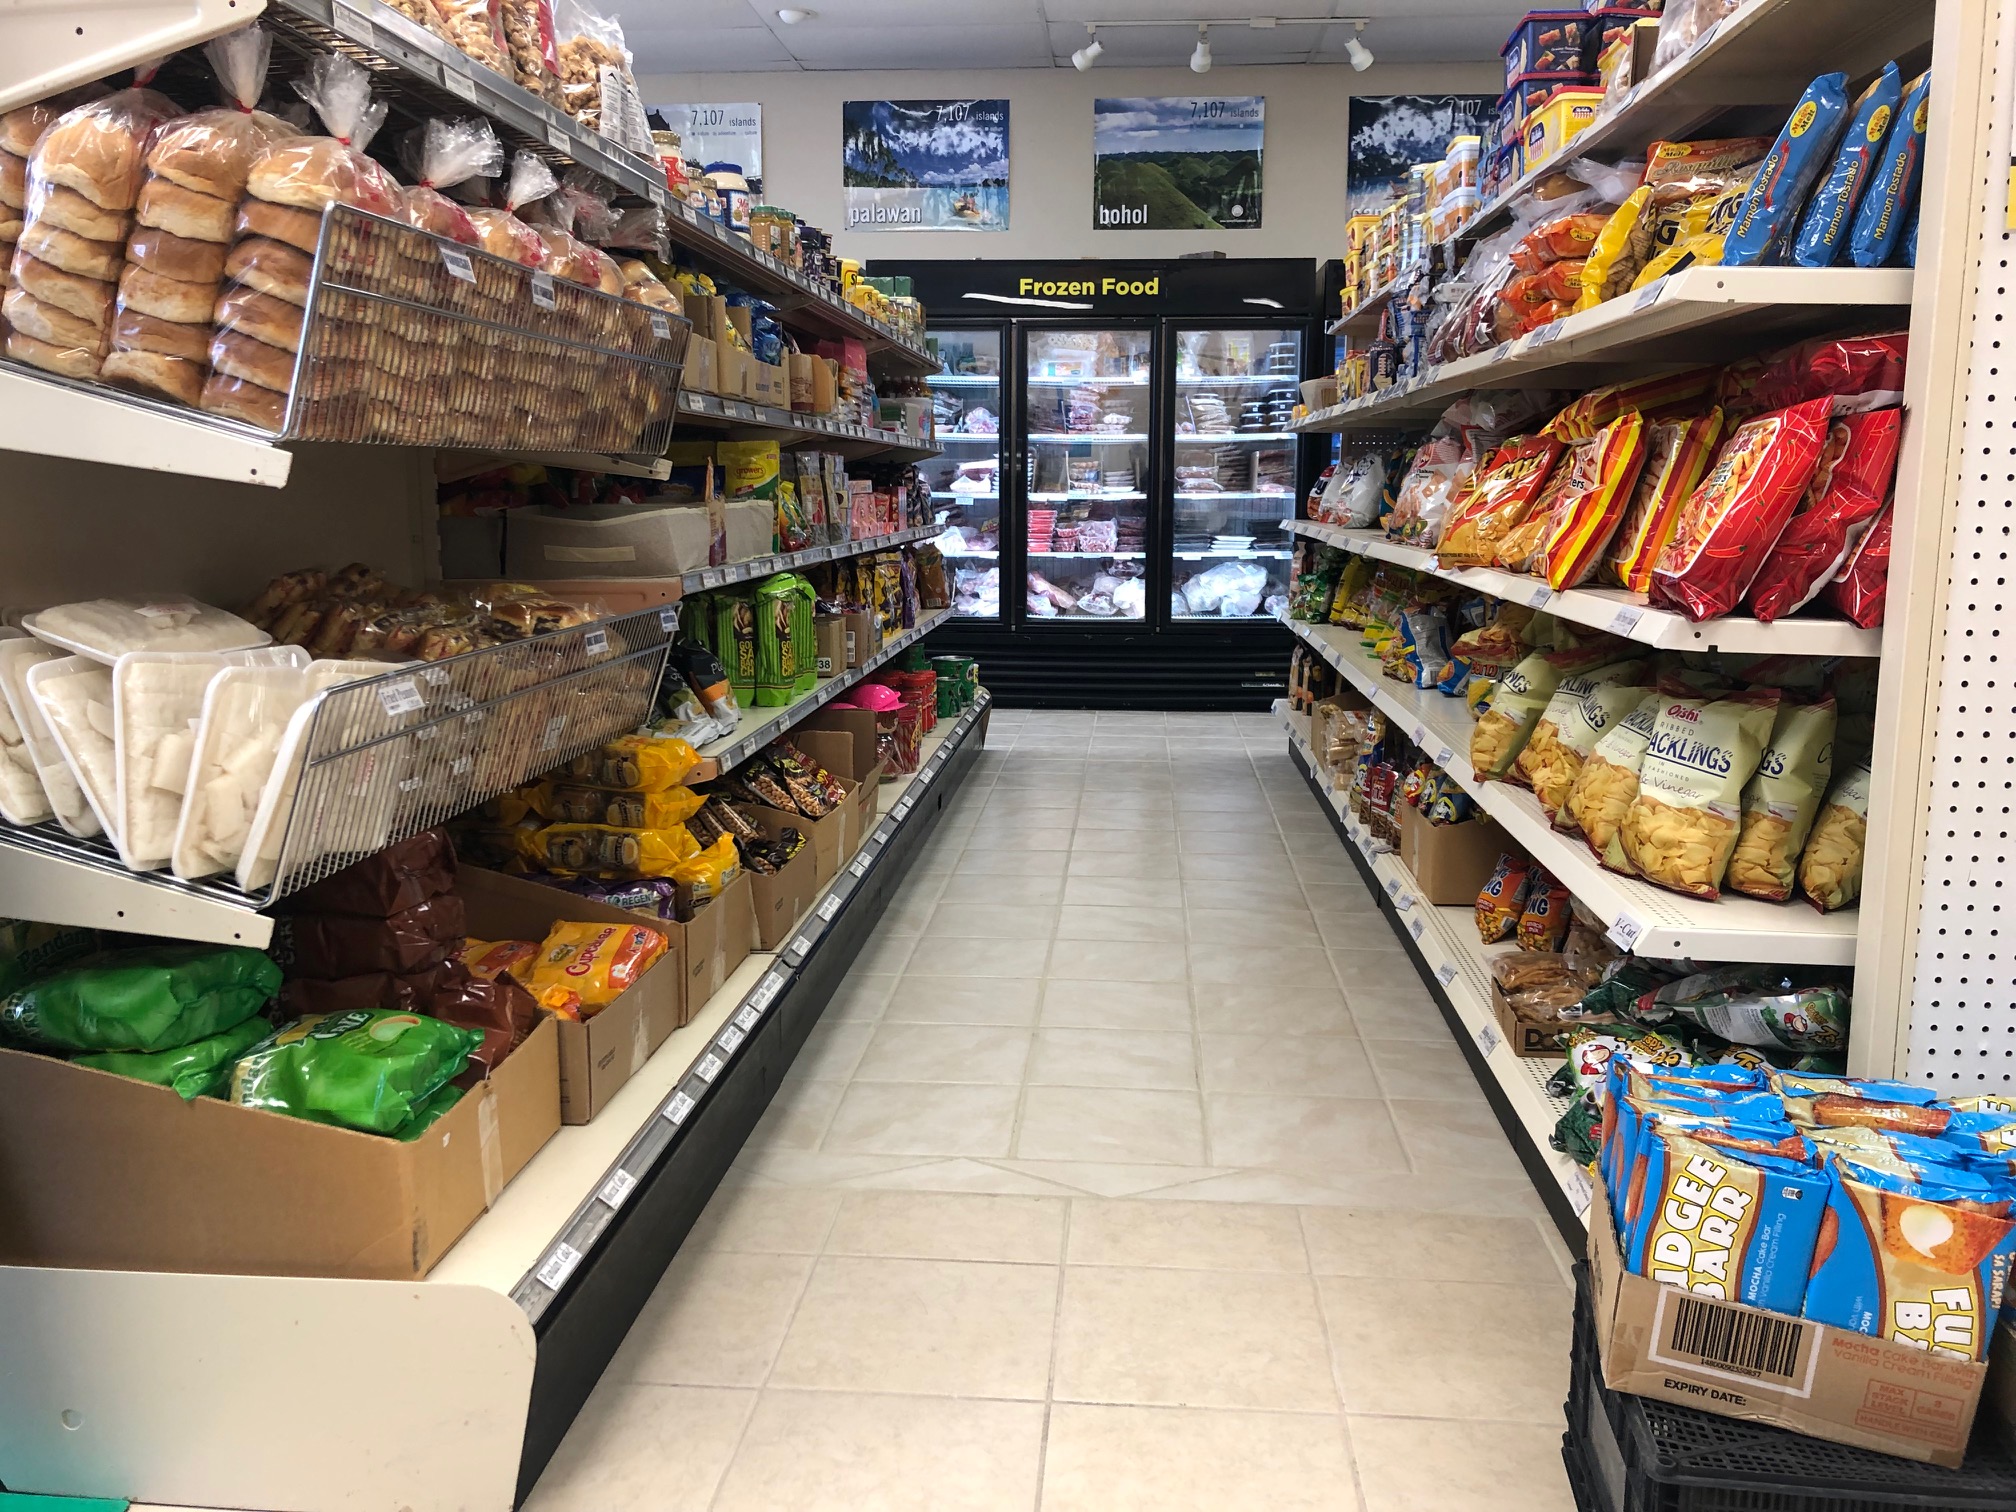 This photo shows the entire snack aisle at Maligaya's store. On the left, there are breads and other sweets, and on the right, there are colorful bags of savory snacks. Photo by Alyssa Buckley.